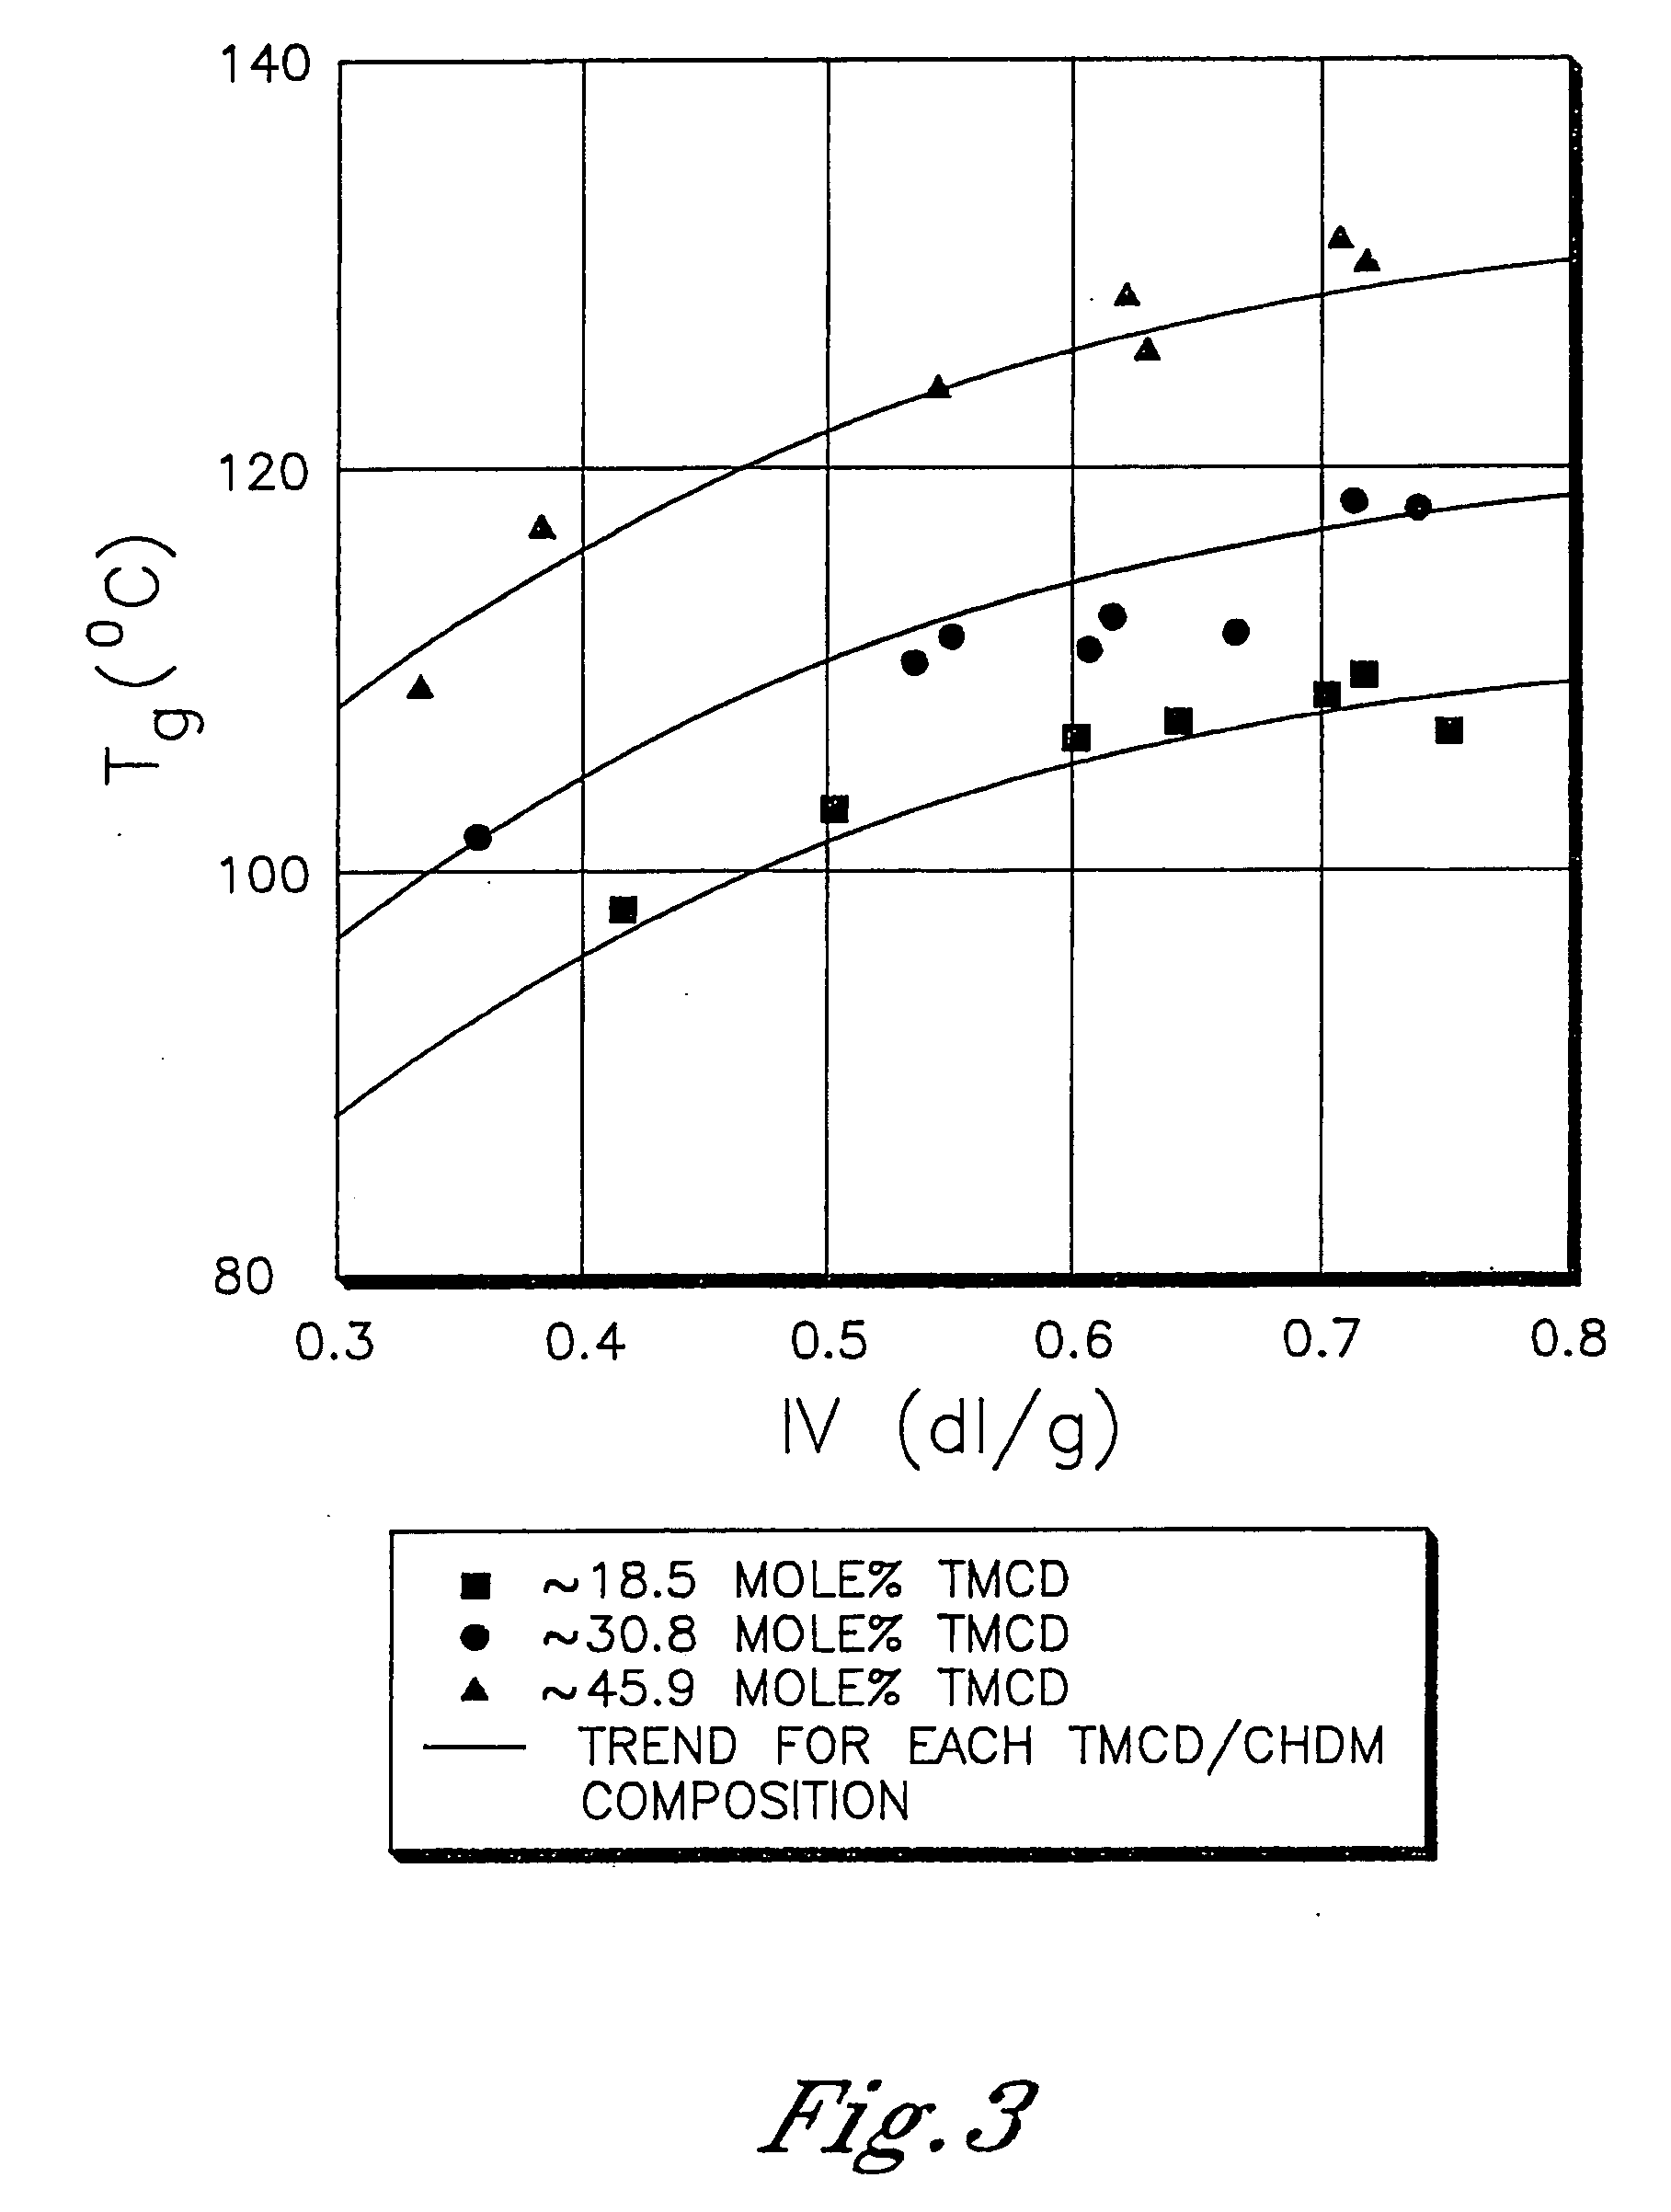 Polyester compositions which comprise cyclobutanediol and certain phosphate thermal stabilizers, and/or reaction products thereof